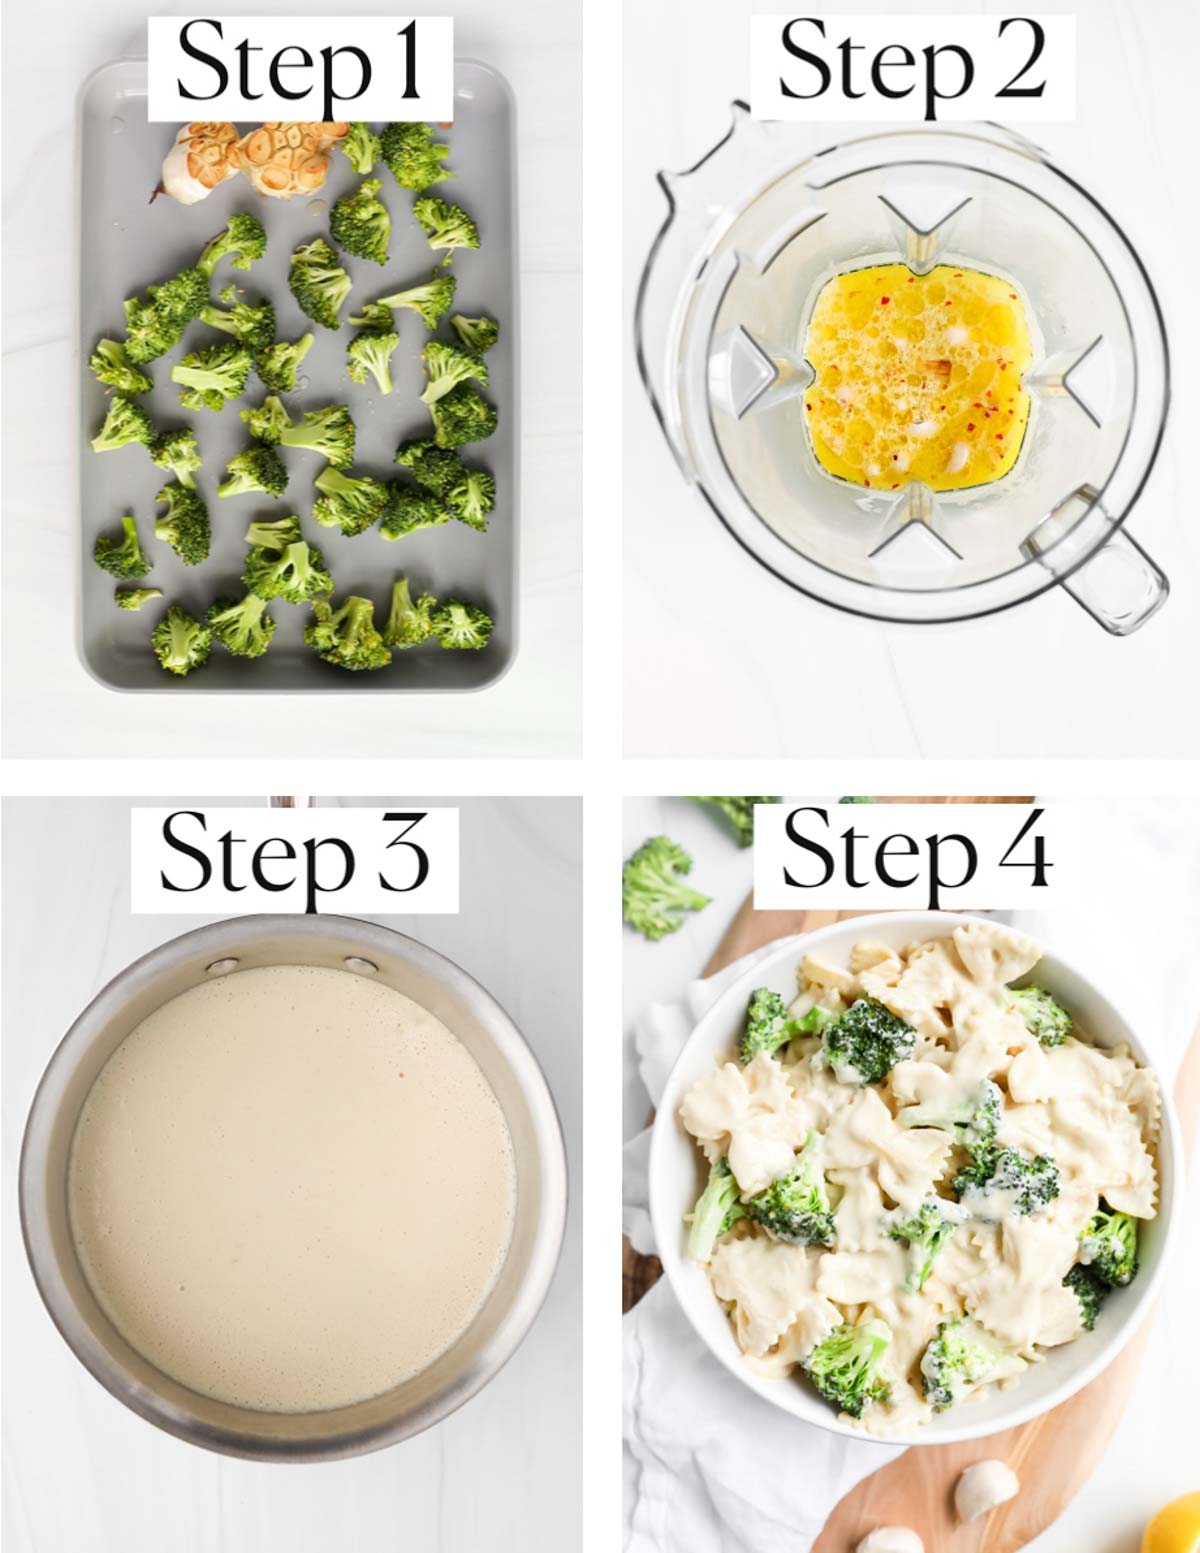 A collage of four pictures labeled step 1-step 4. Step 1: broccoli and garlic on a baking sheet. Step 2: a yellow sauce in a blender. Step 3: a creamy white sauce in a pan. Step 4: creamy white pasta sauce coating pasta and broccoli in a bowl.